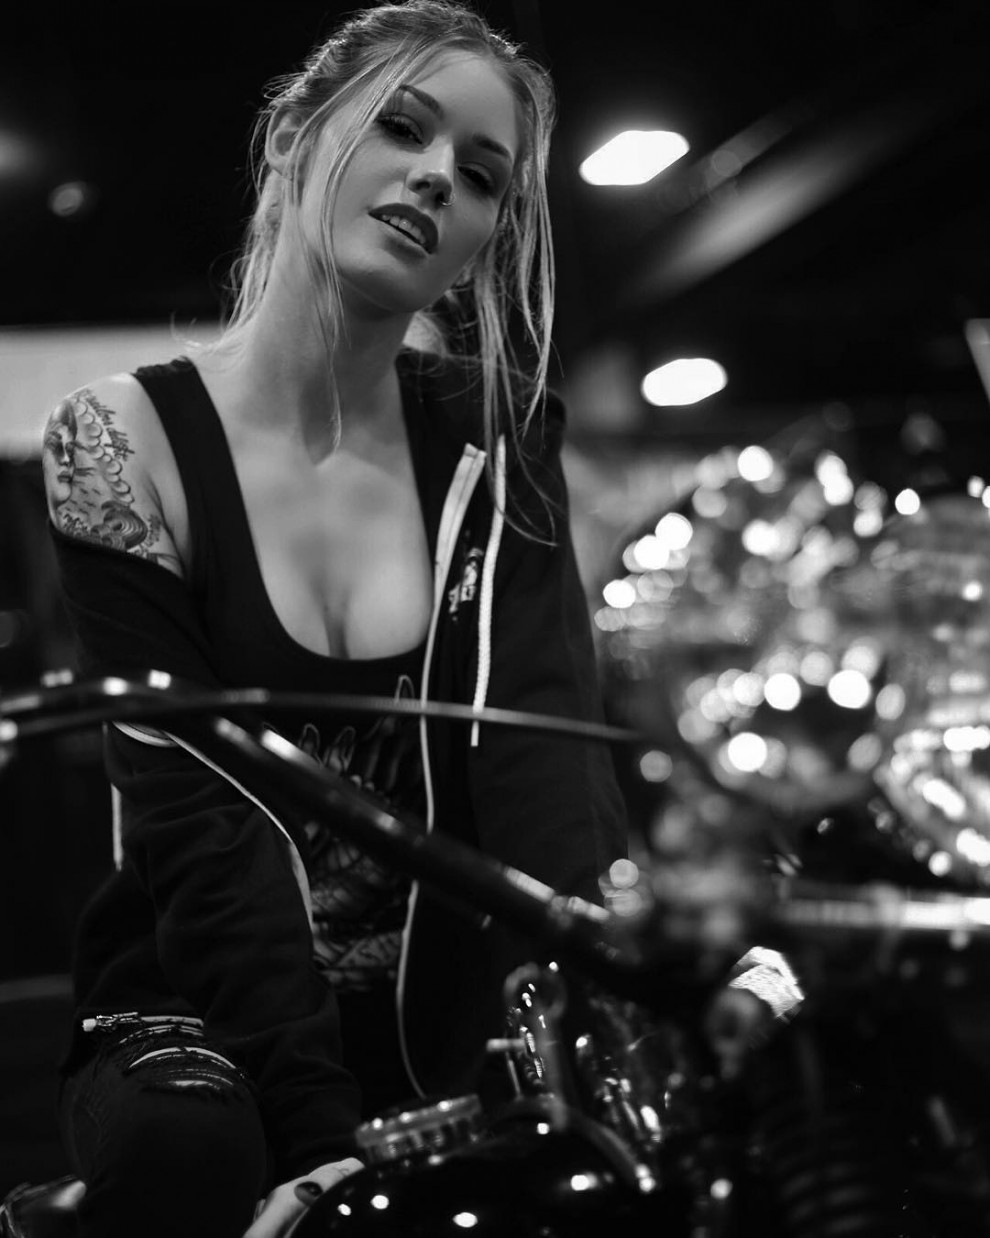 @teapartyx at the Northeast Motorcycle Expo [MIC]